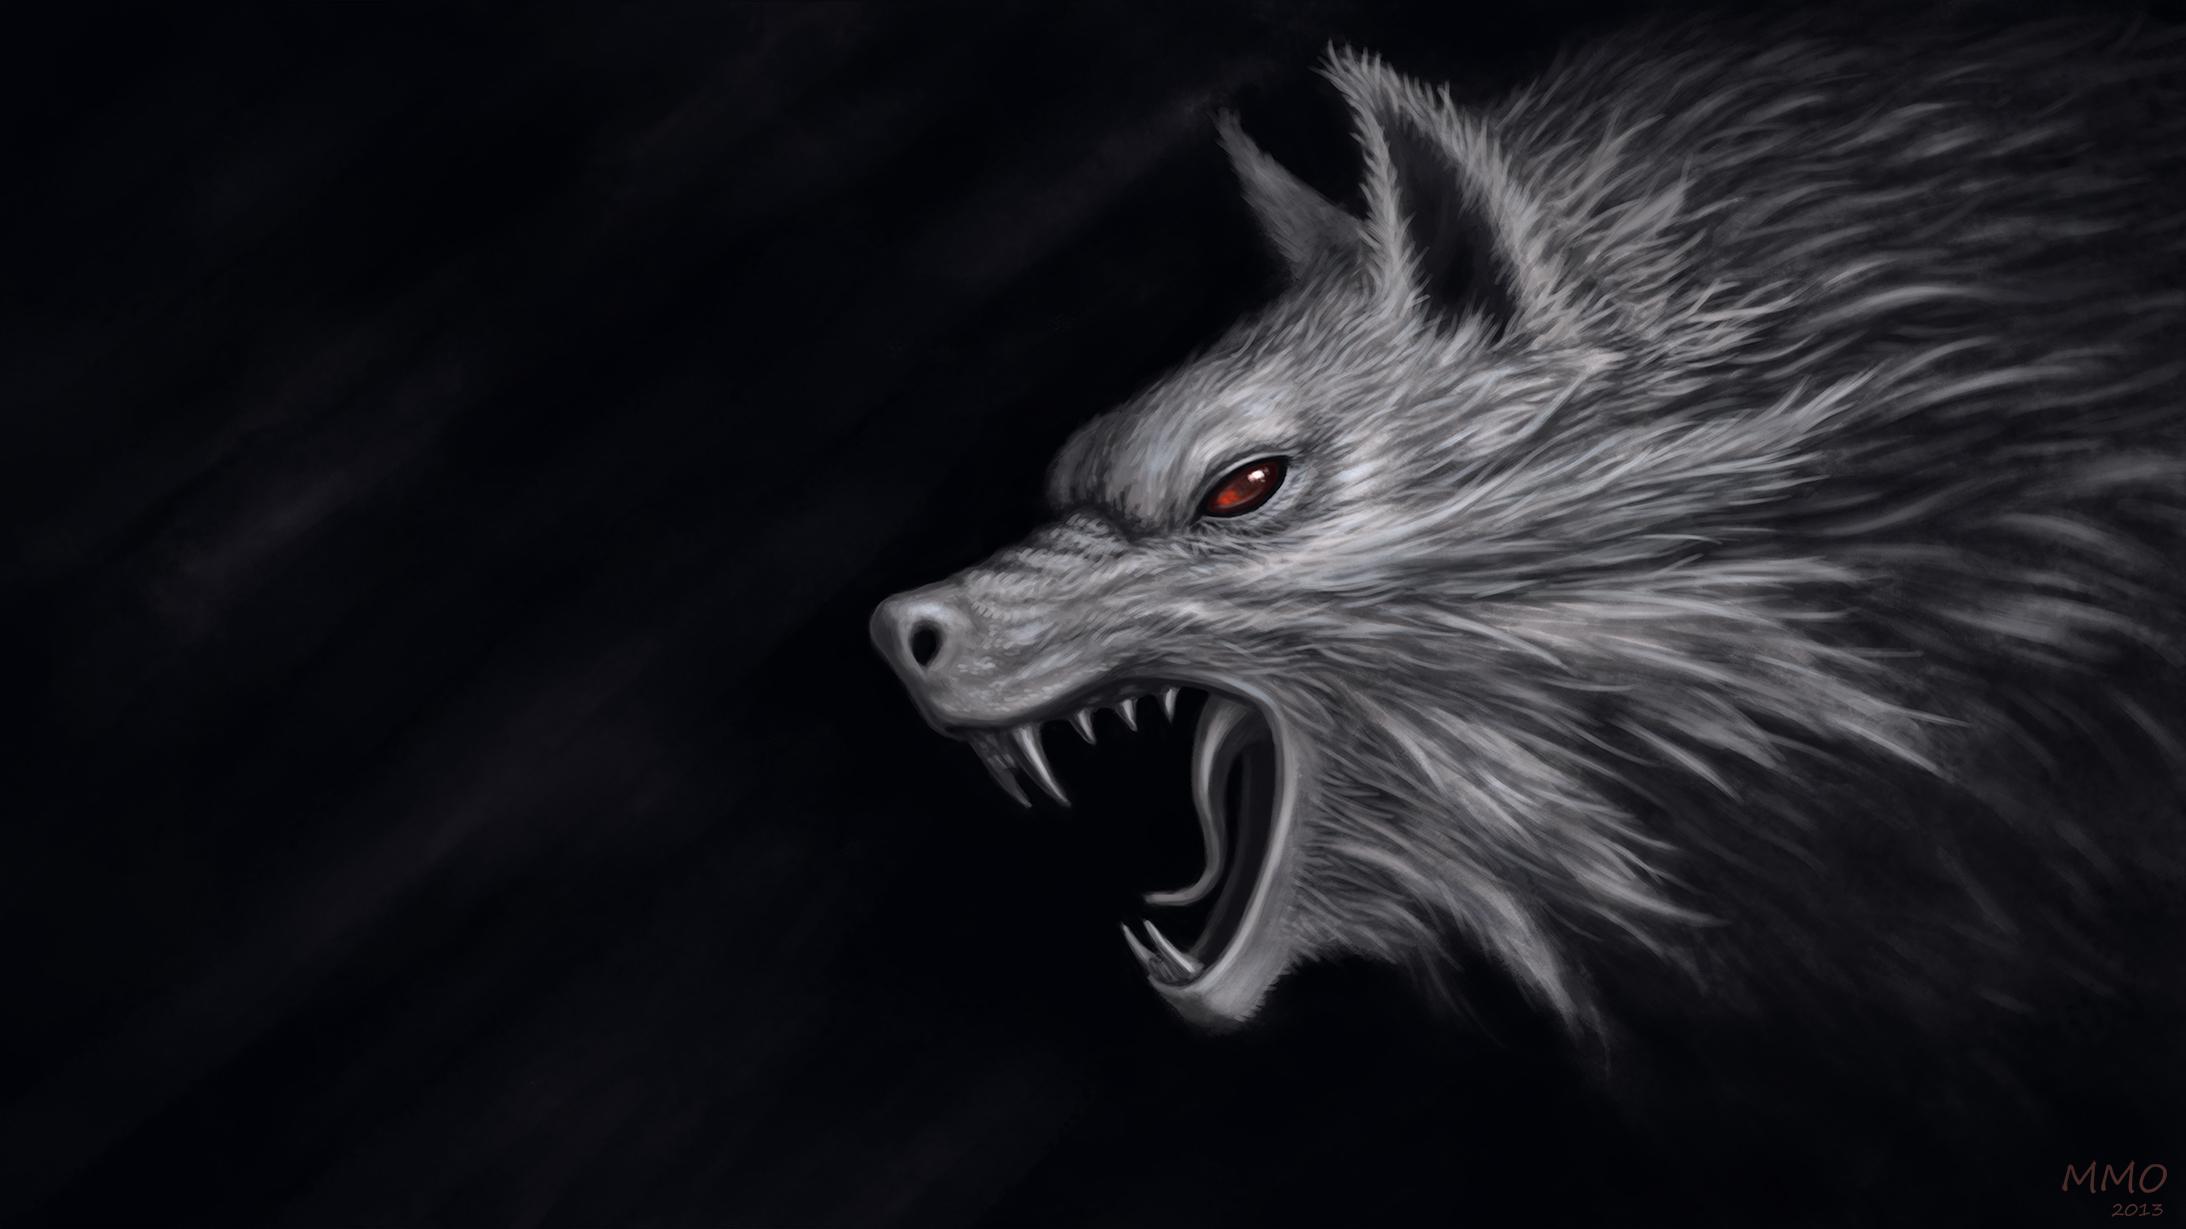 Scary Wolf Wallpaper. forest werewolf background wolf monster anime